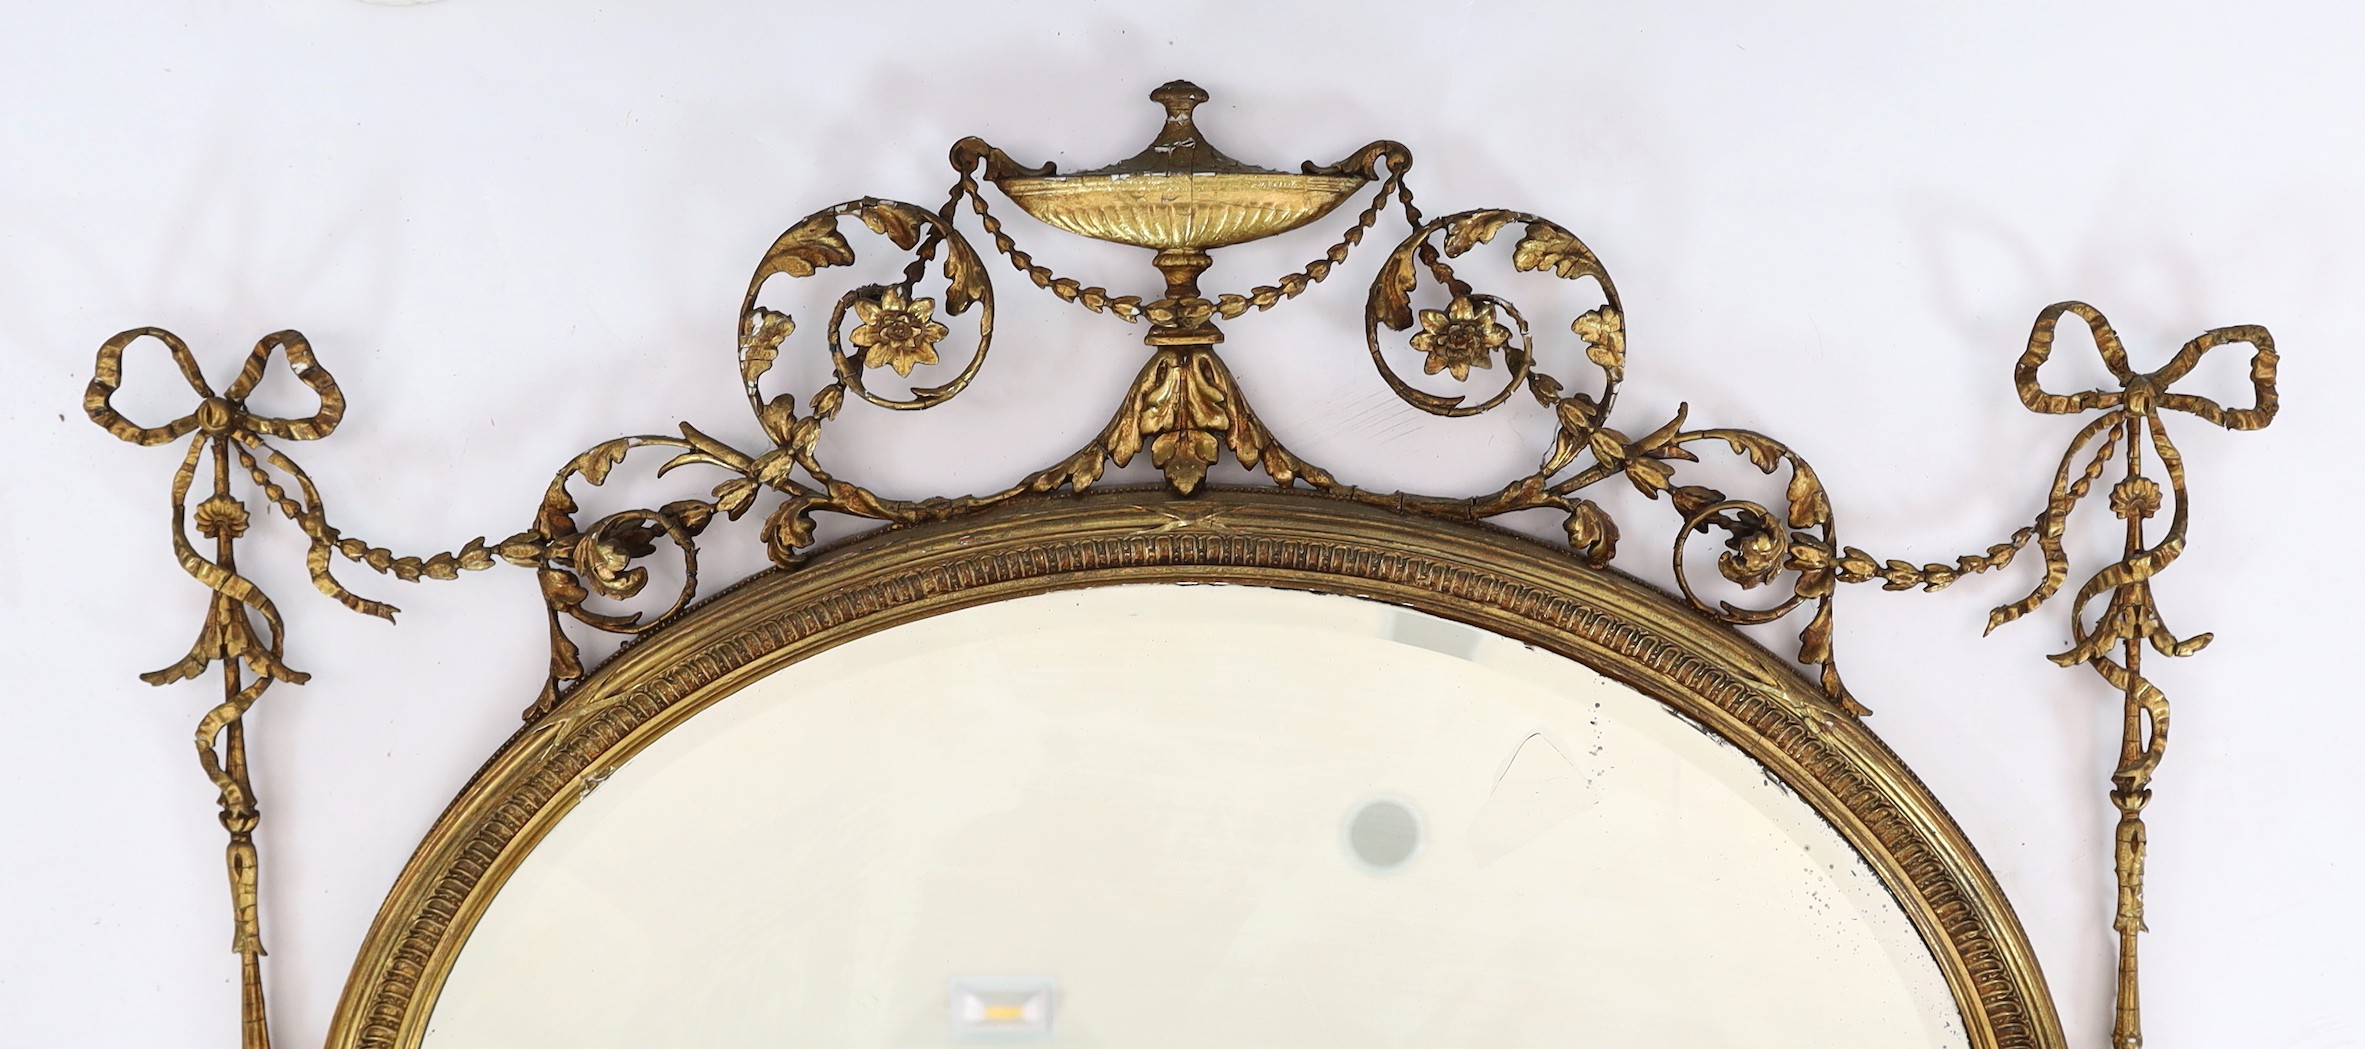 A late Victorian Adam Revival oval wall mirror, with urn, foliate scroll, ribbon and harebell - Image 4 of 6